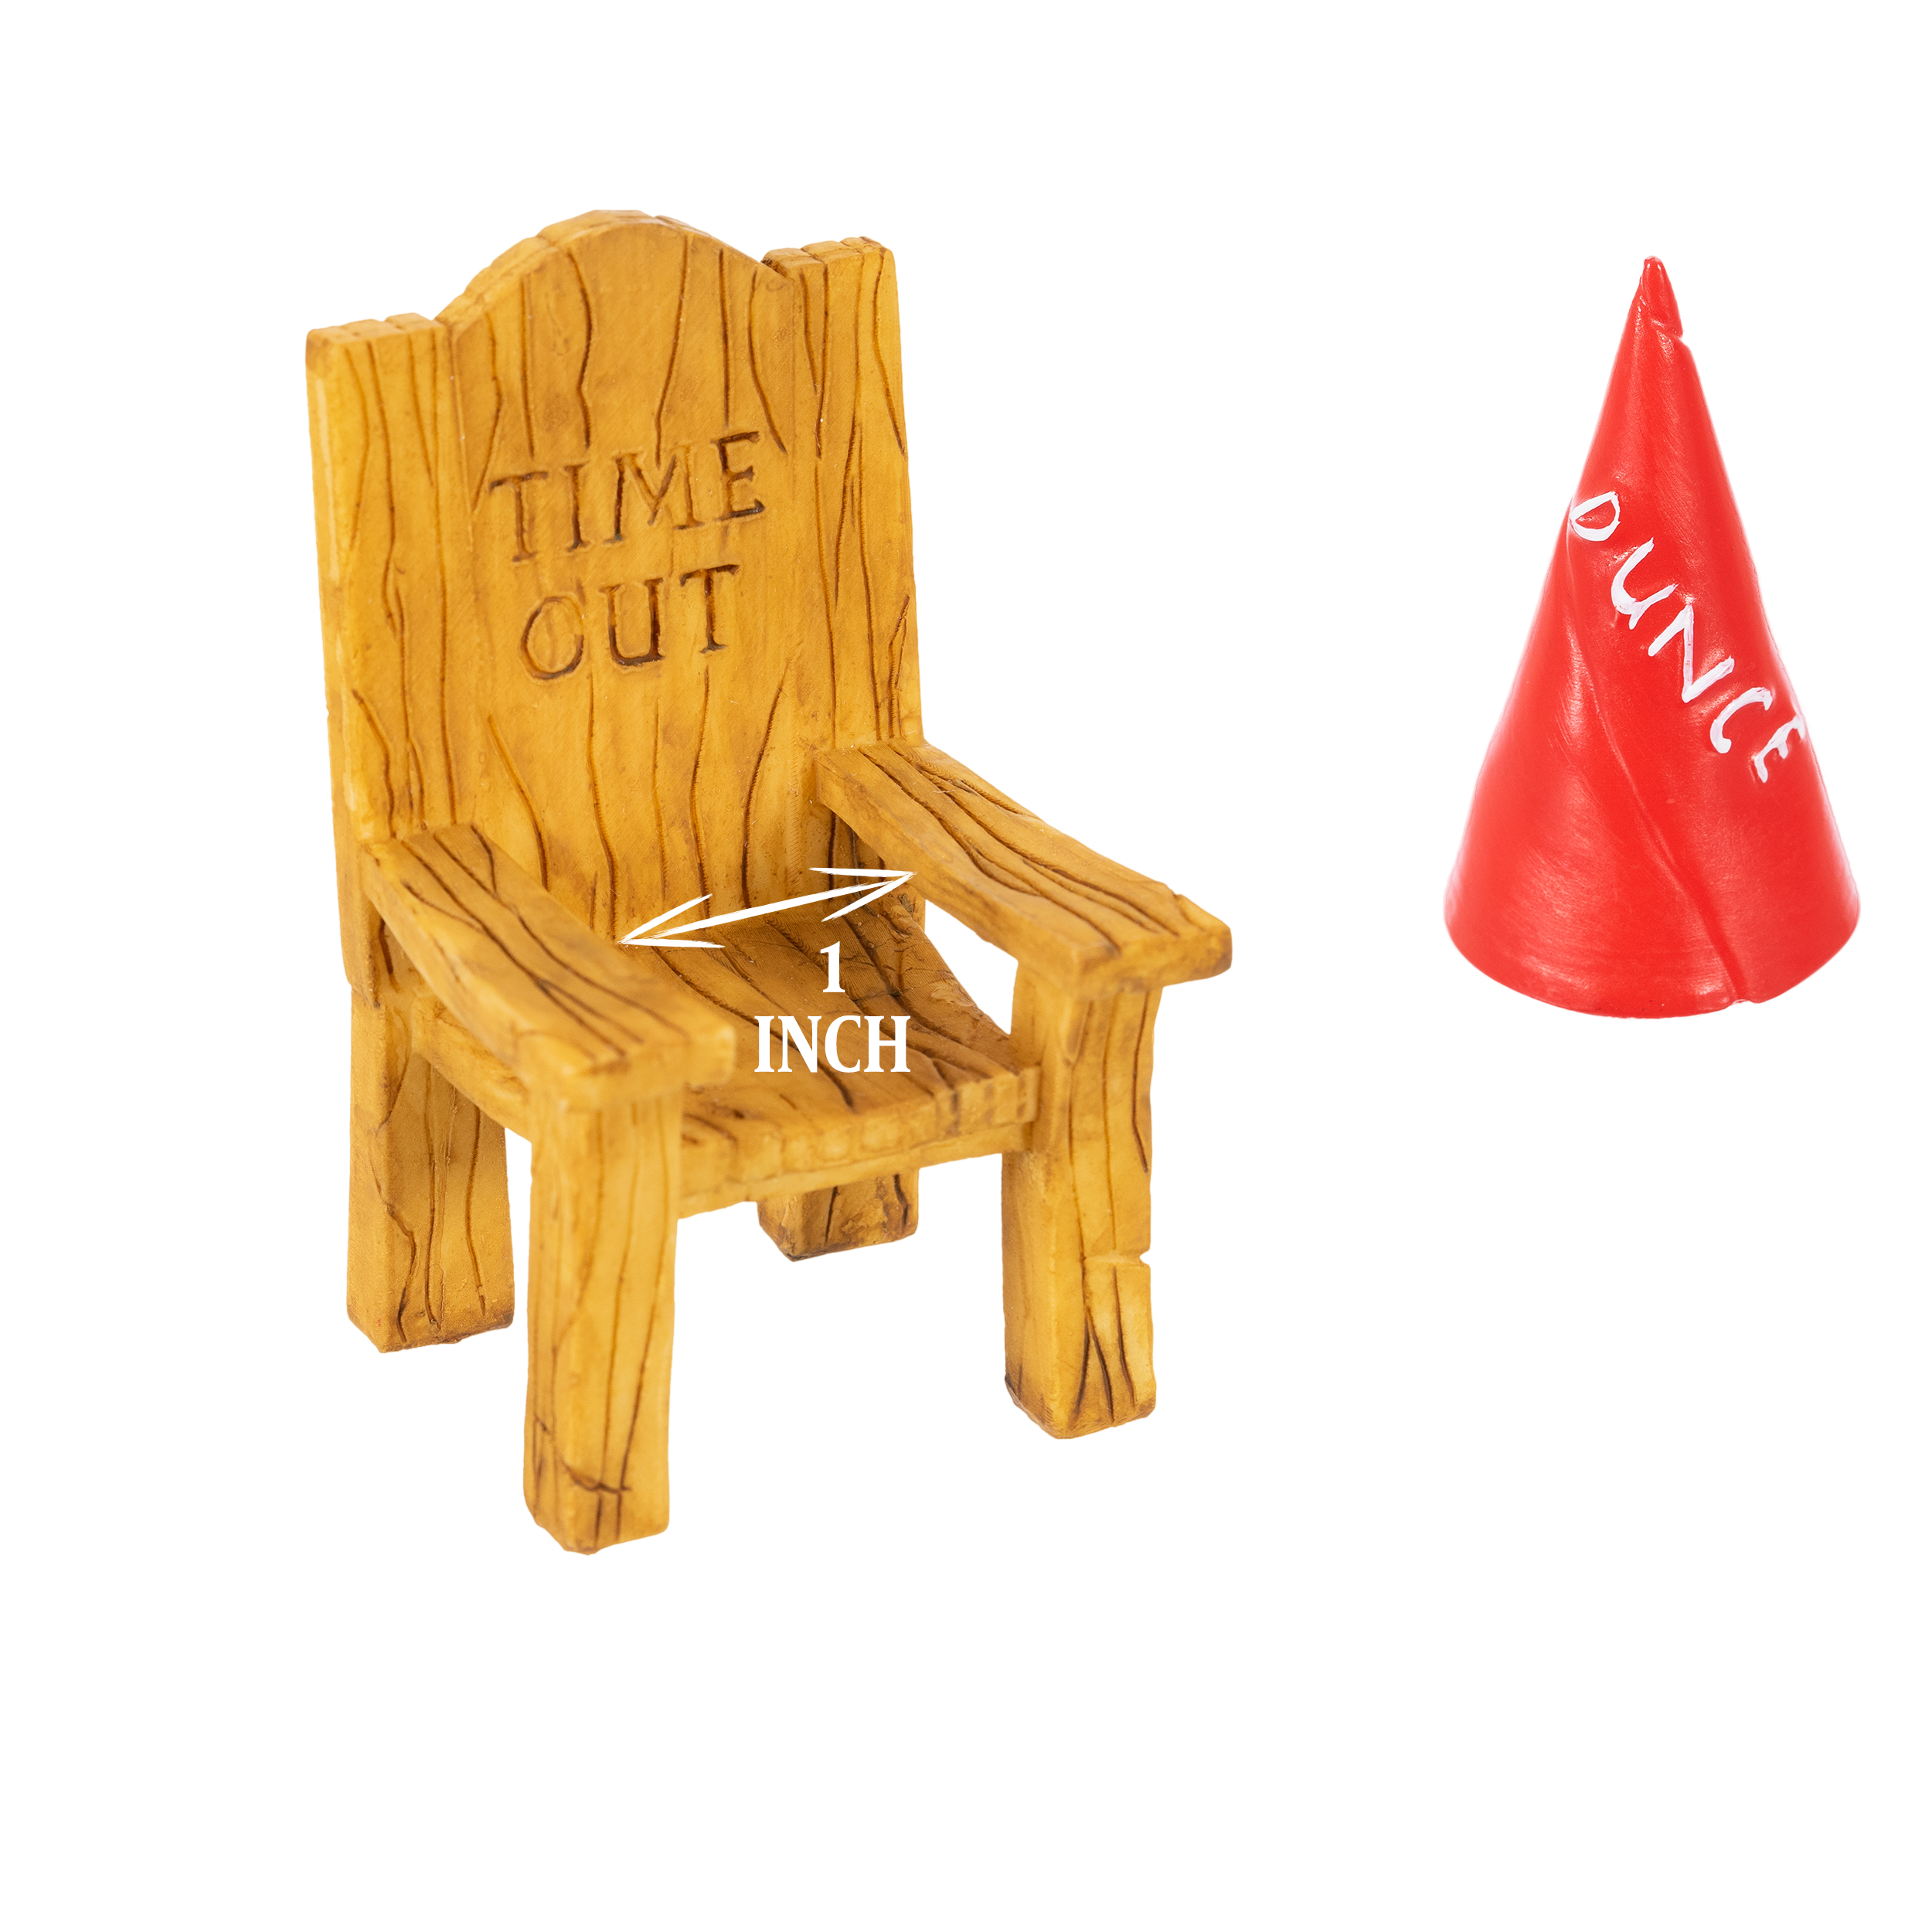 Wholesale of Dice Jail Chair & Dunce Hat